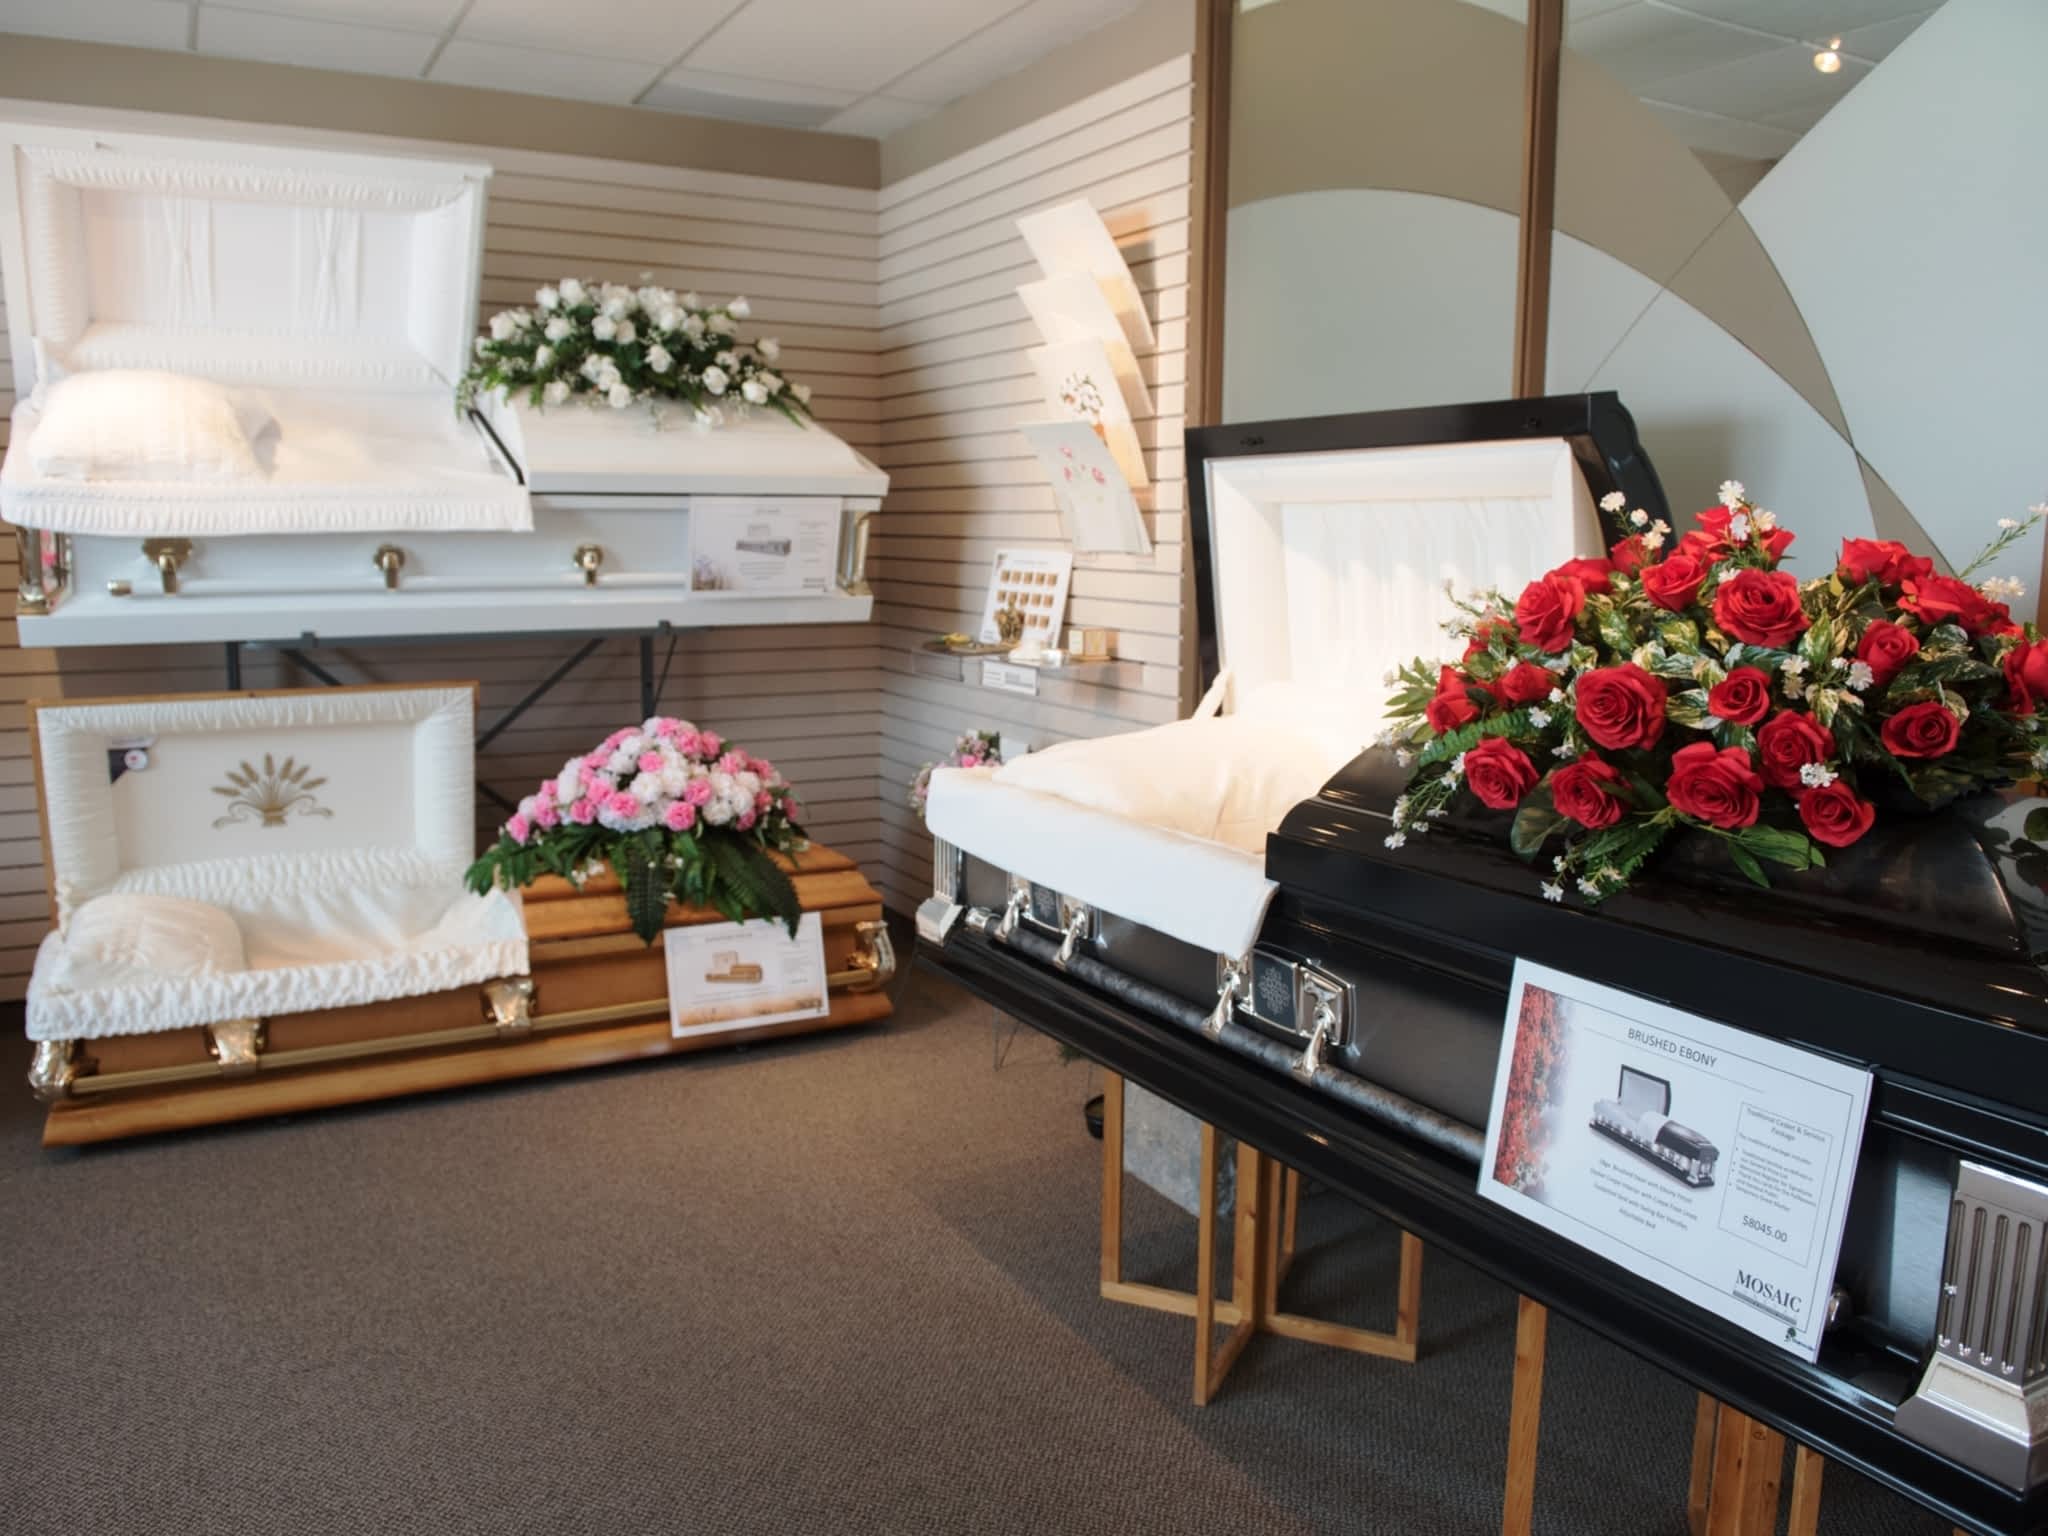 French lick indiana funeral homes